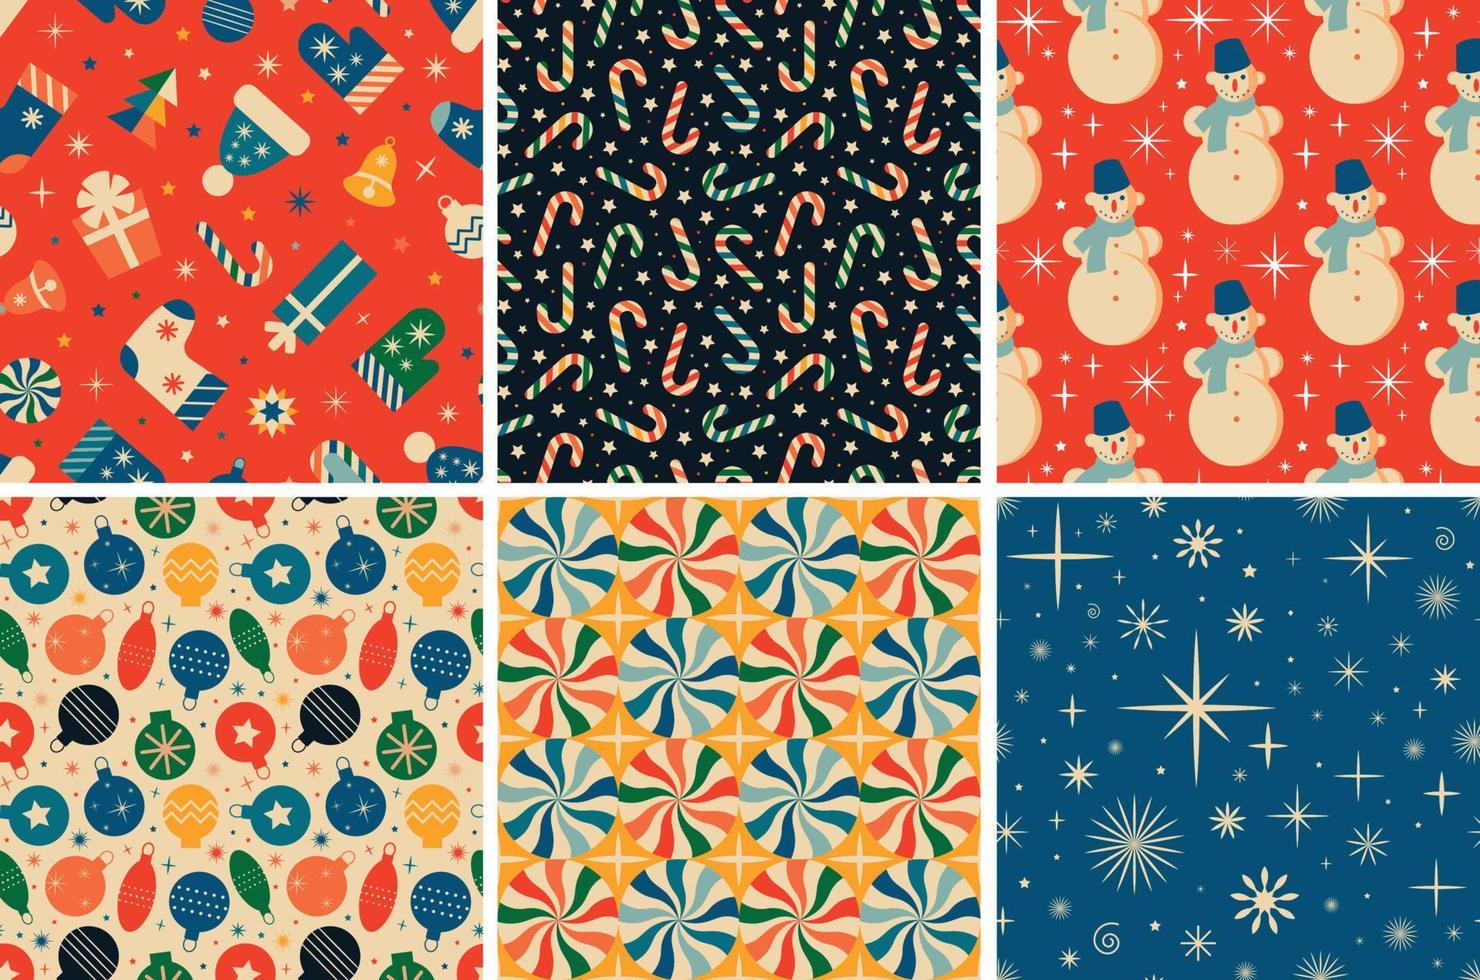 Vintage retro Christmas seamless patterns in the style of the 60s and 70s vector